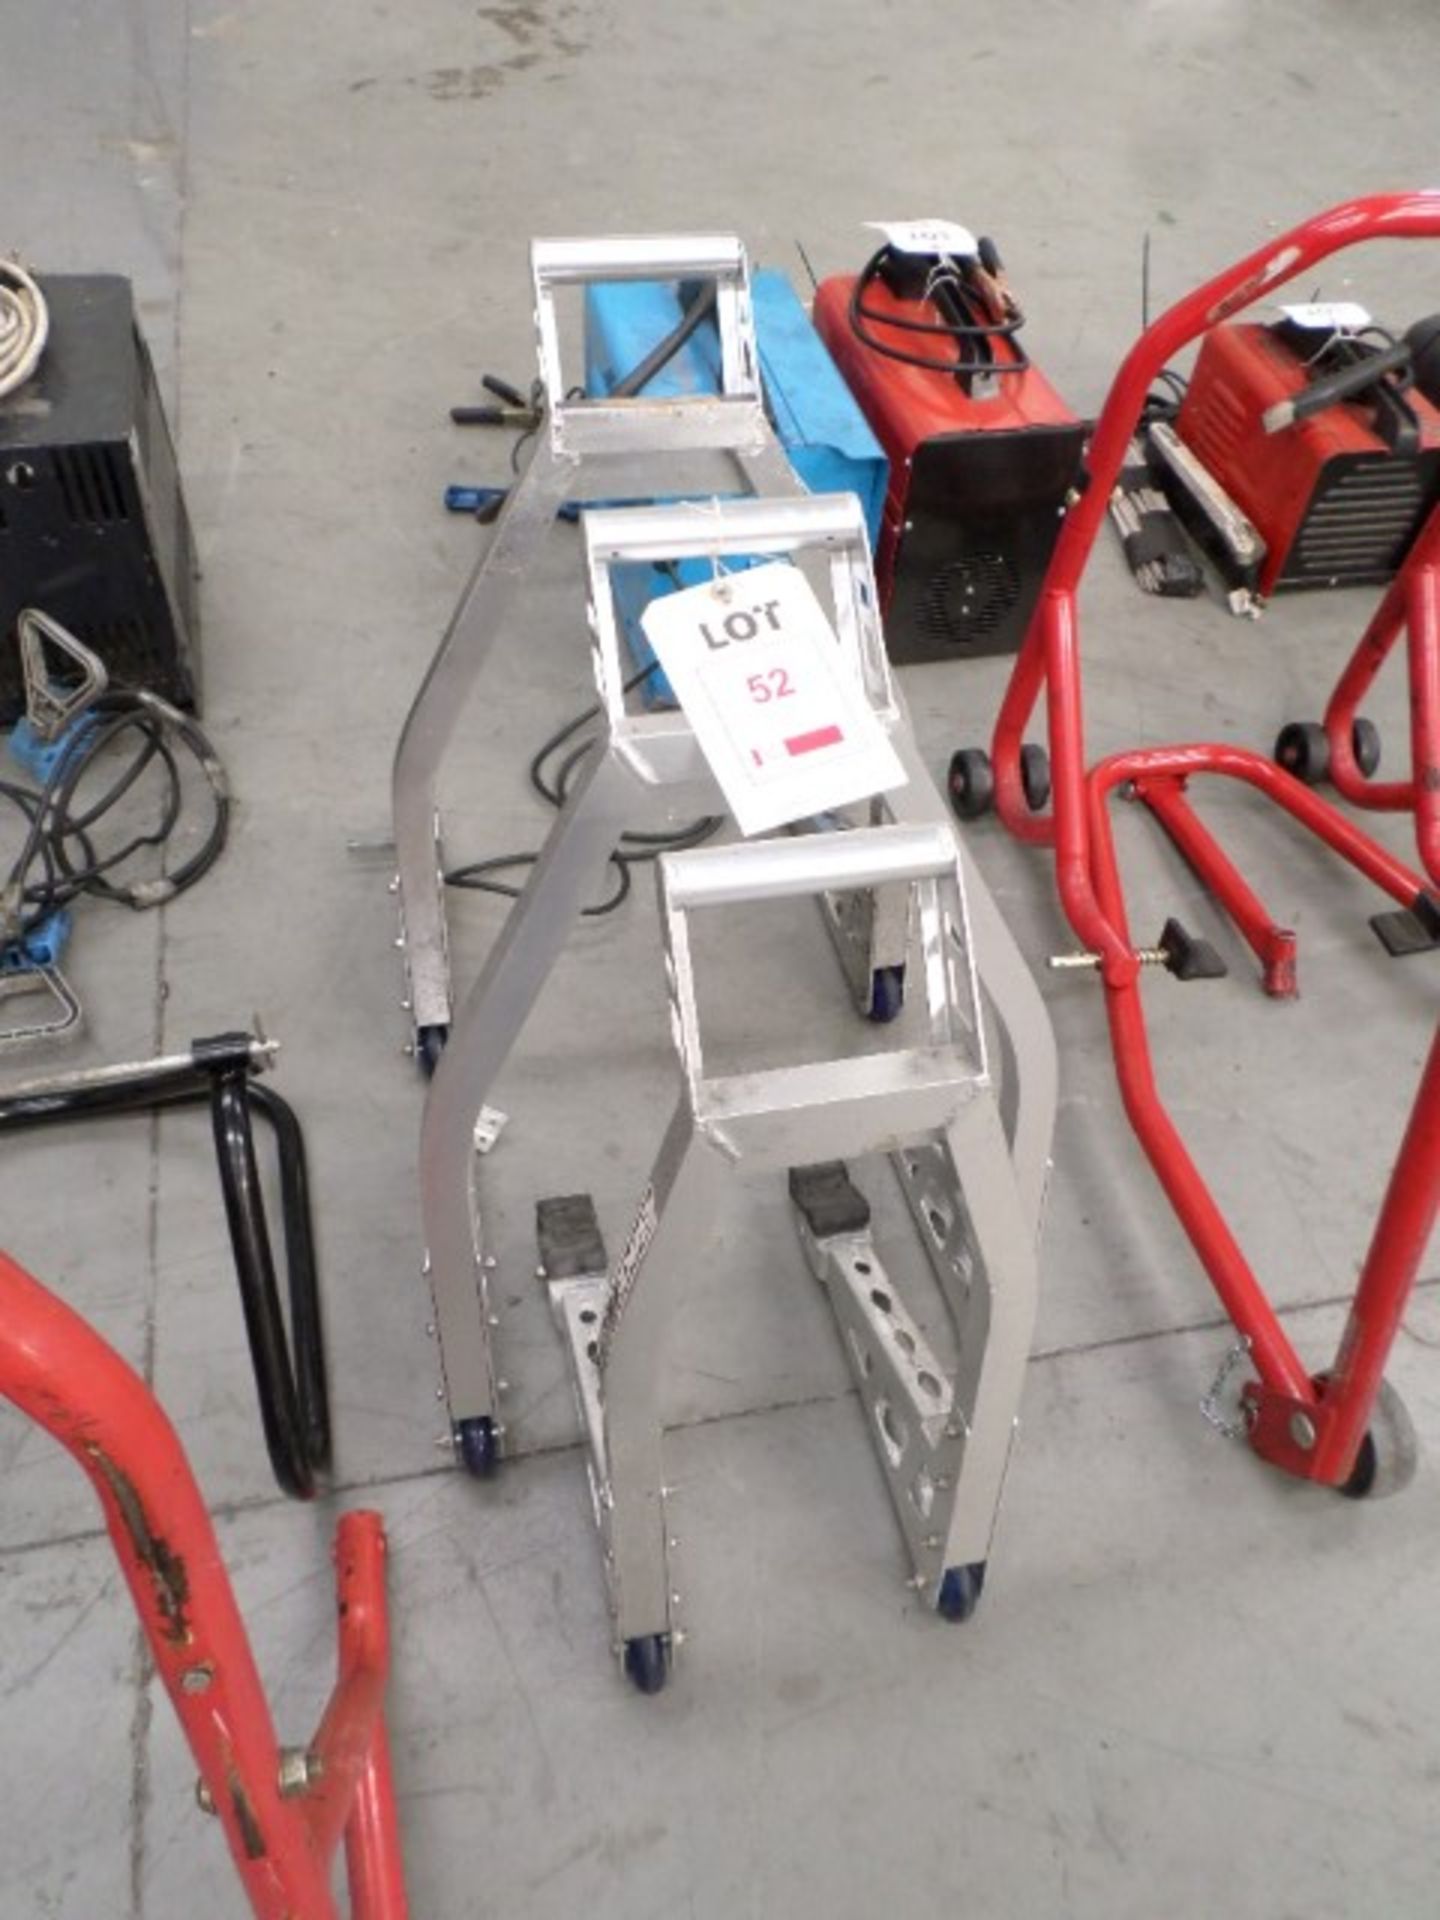 2 Bike Tech aluminium box section, motorcycle rear paddock stands and 1 front lift motorcycle stand - Image 2 of 2